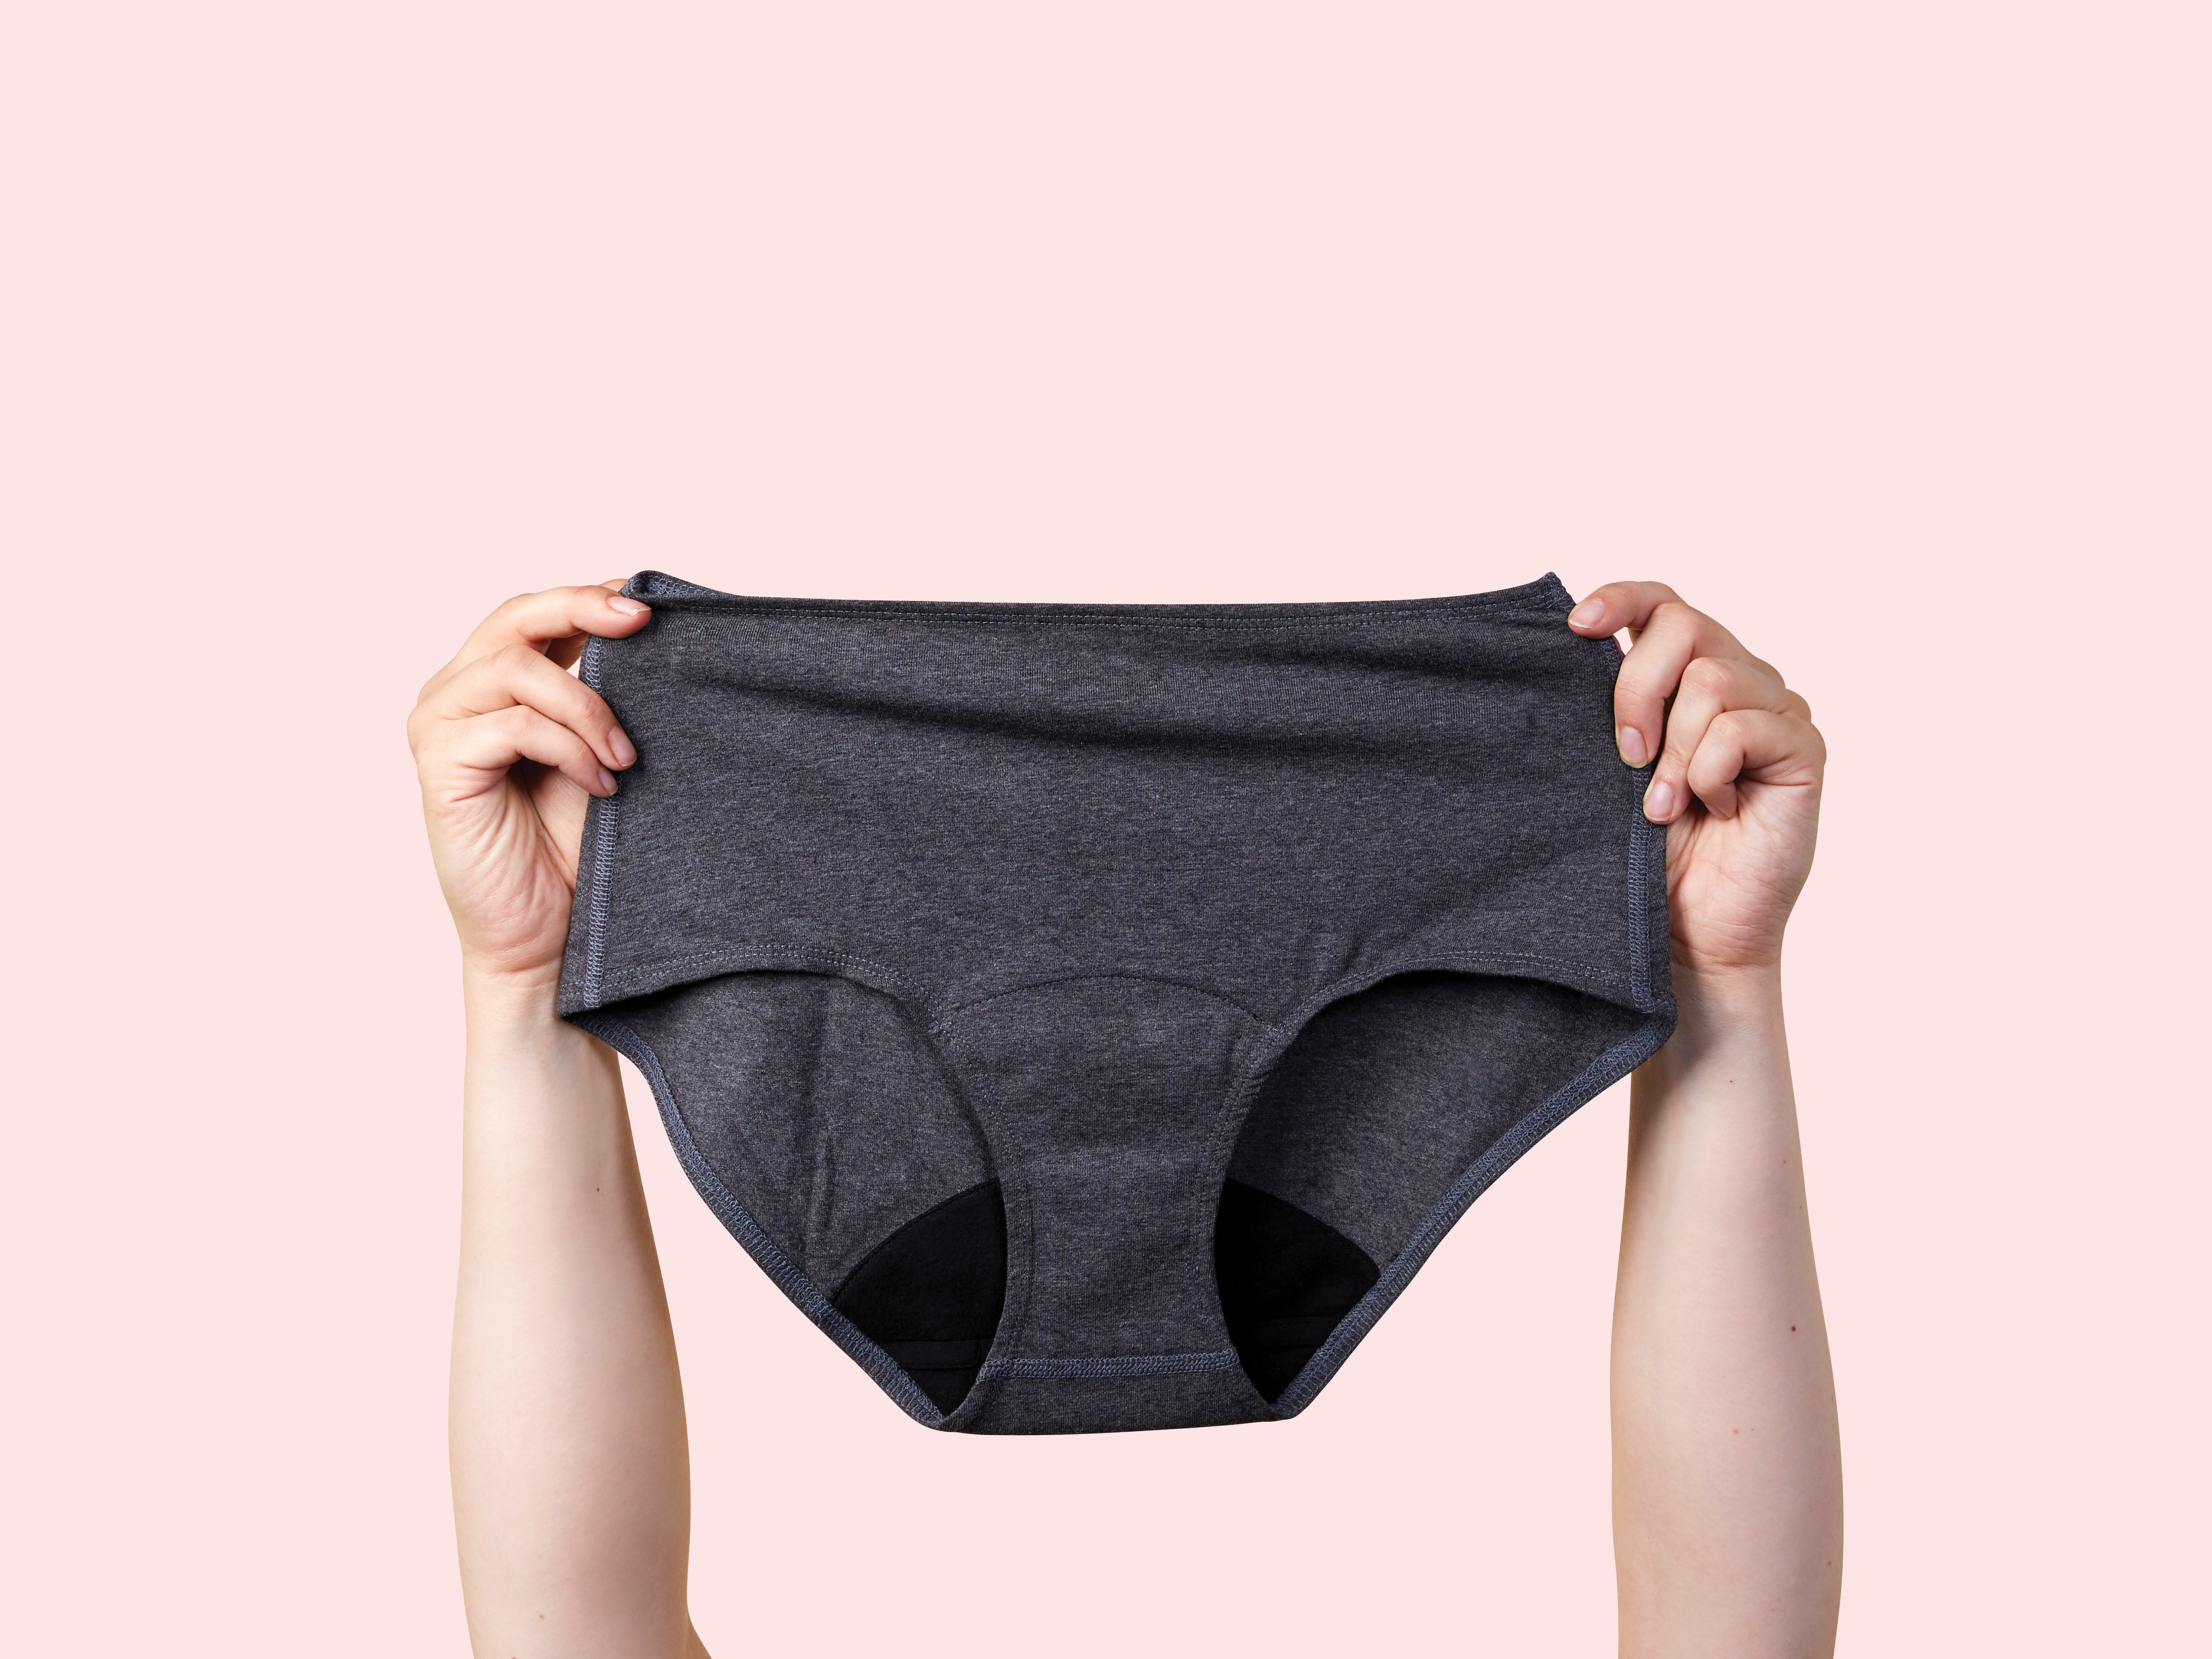 Image of someone holding up Lunapads period underwear against a pink backdrop